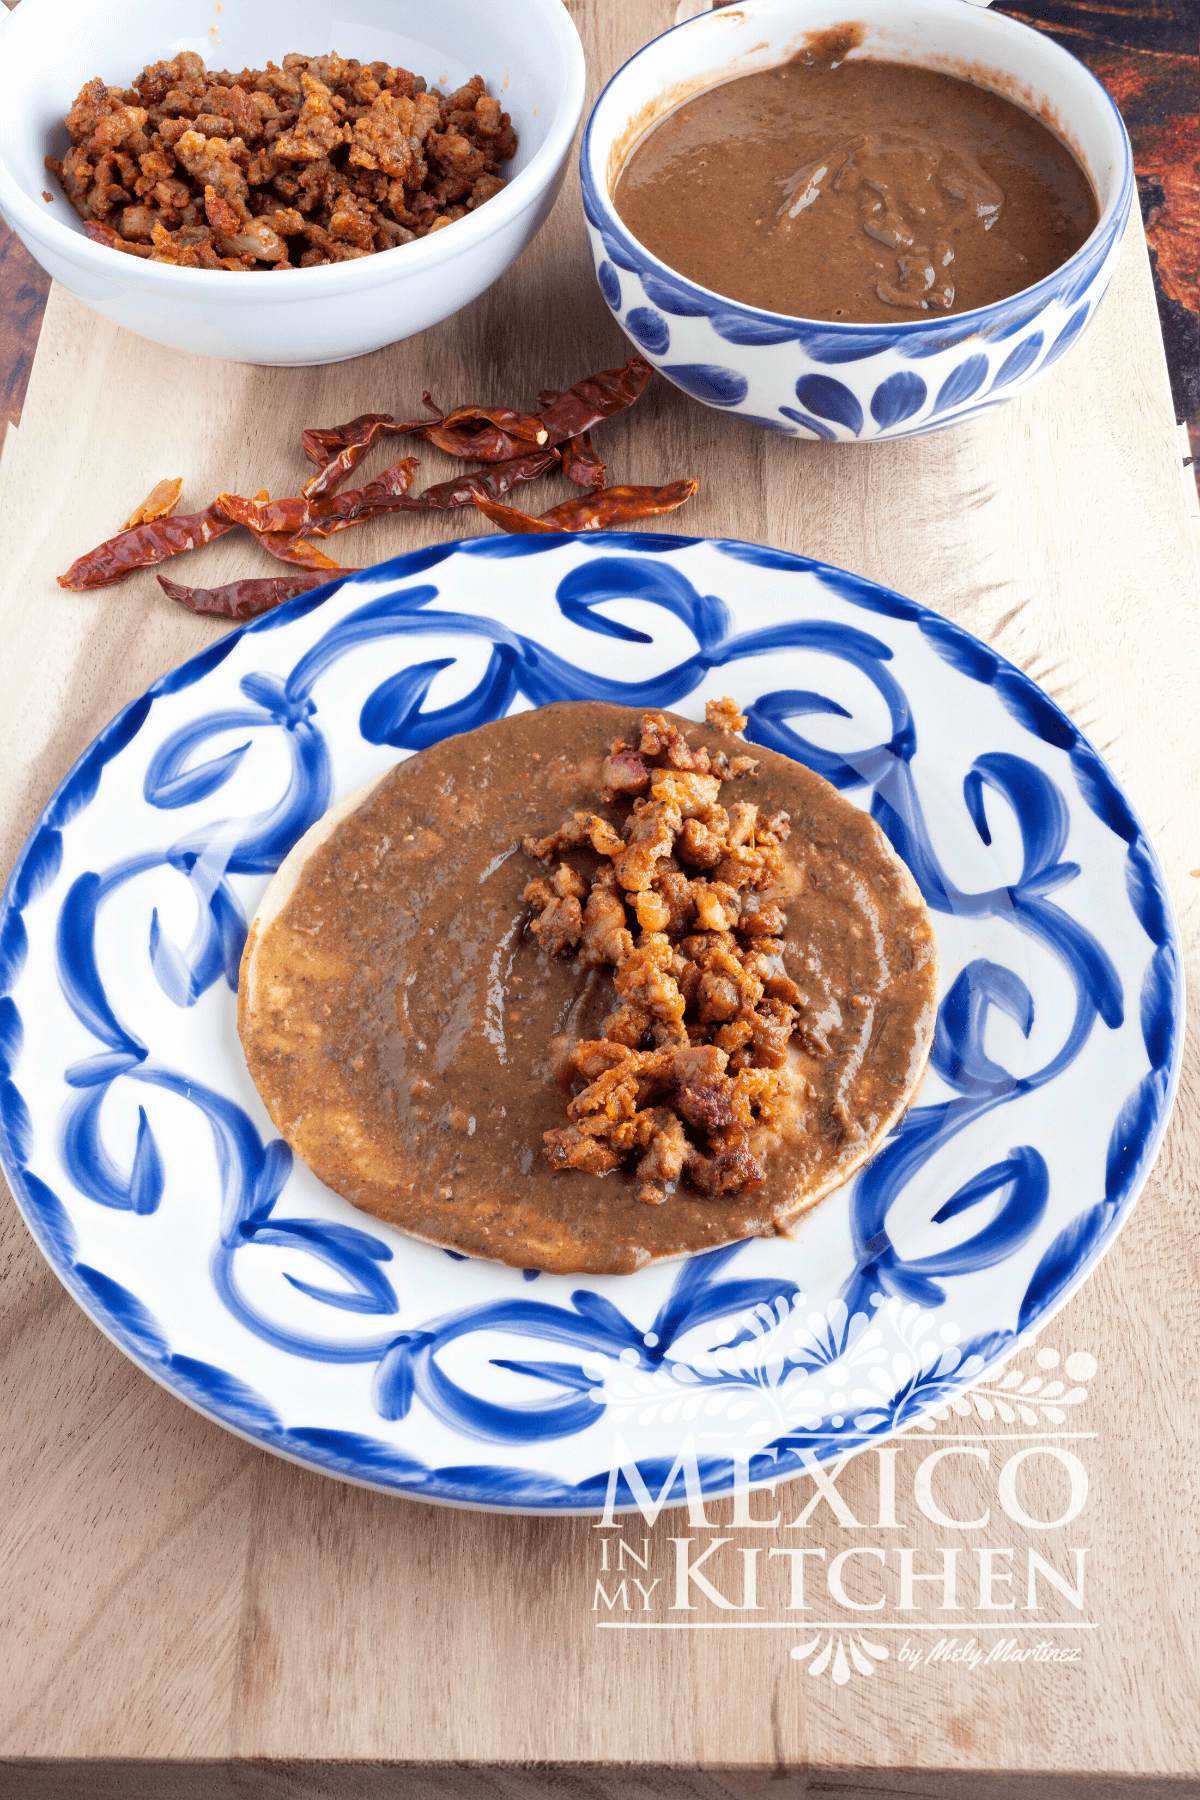 Corn tortilla cover in bean sauce and topped with chorizo.